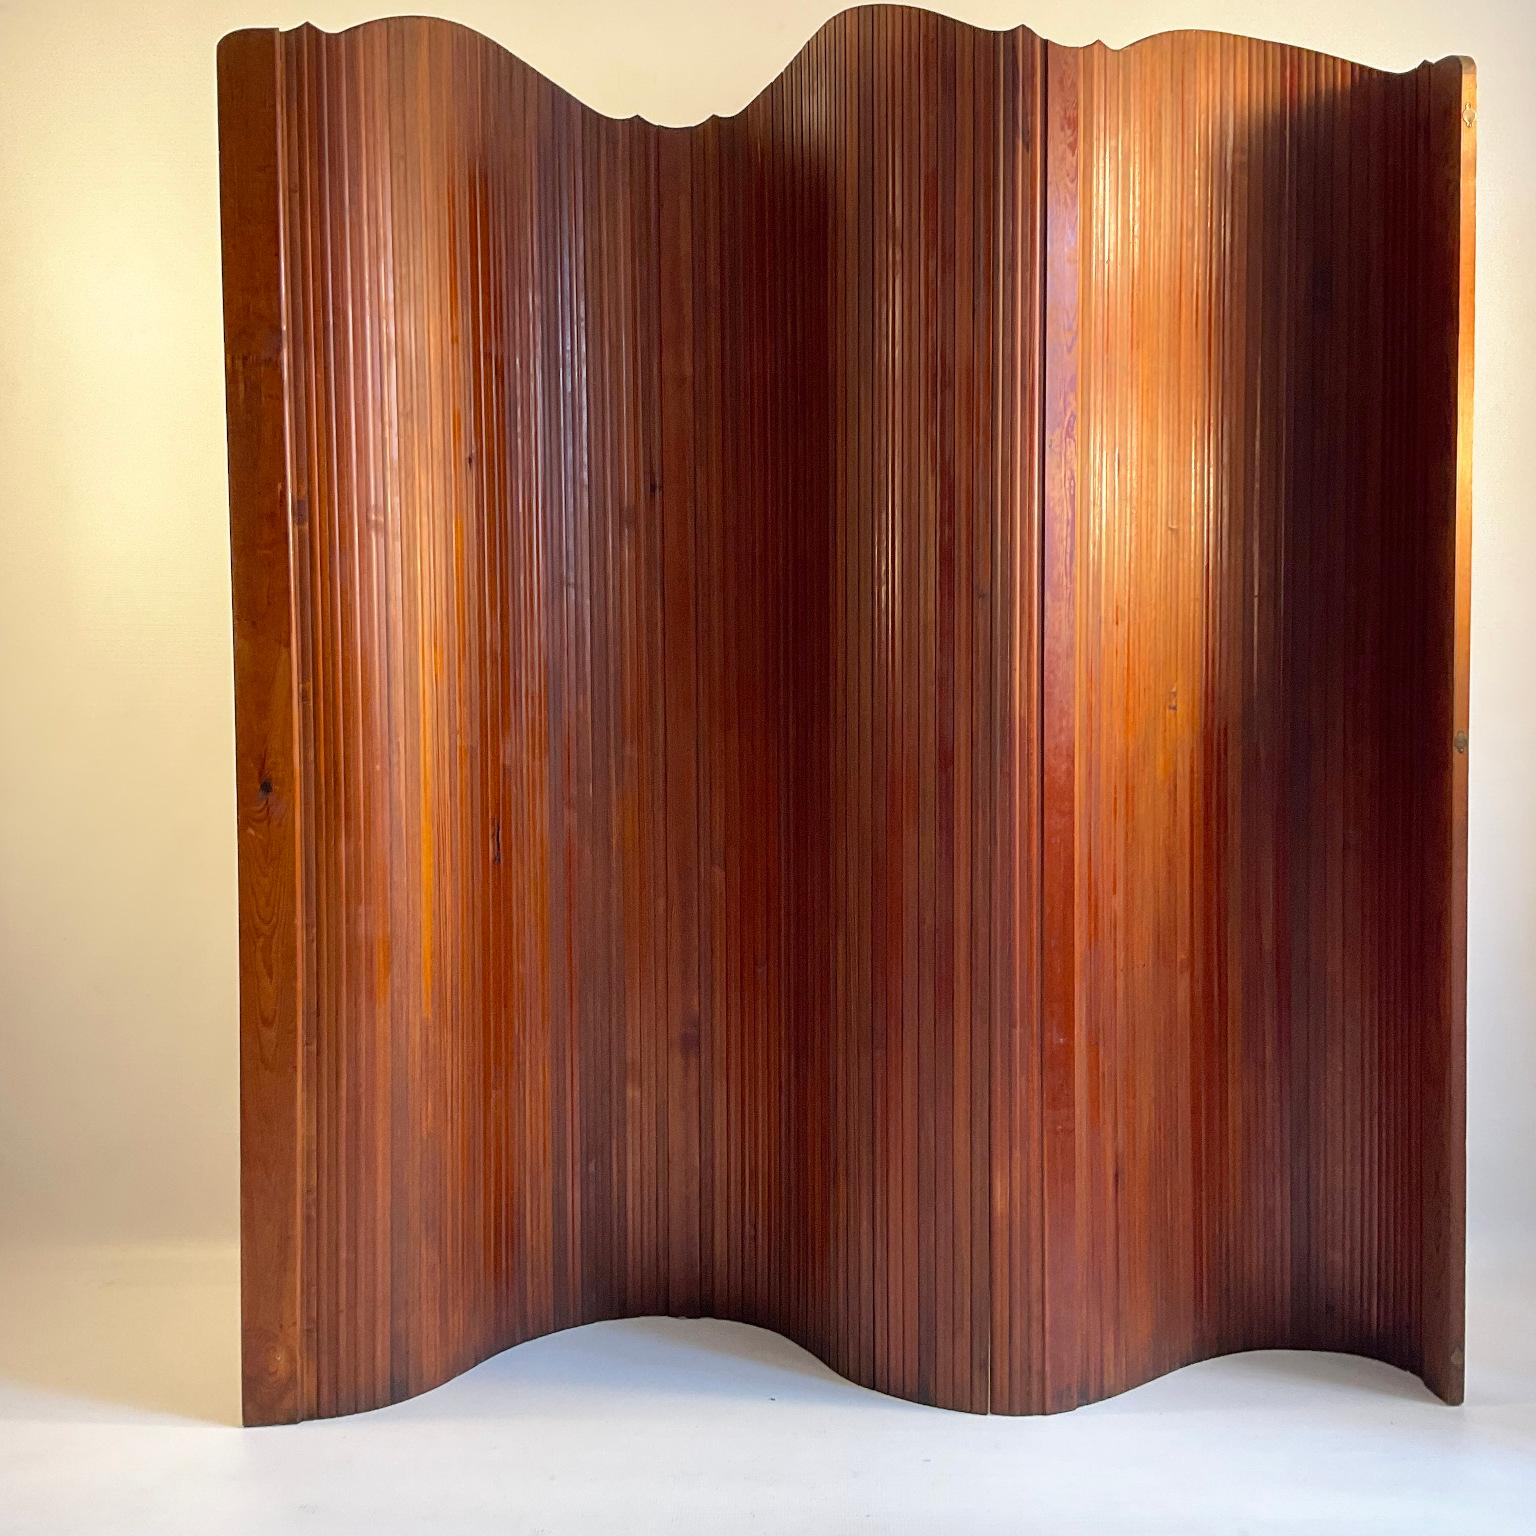 1950s Tambour screen by the French manufacturer S.N.S.A. Made in stained pitchpine.
Its flexible structure allows it to stand freely and shape curves, perfect for a dressing room or as a room divider, can also be rolled up for easy storage.